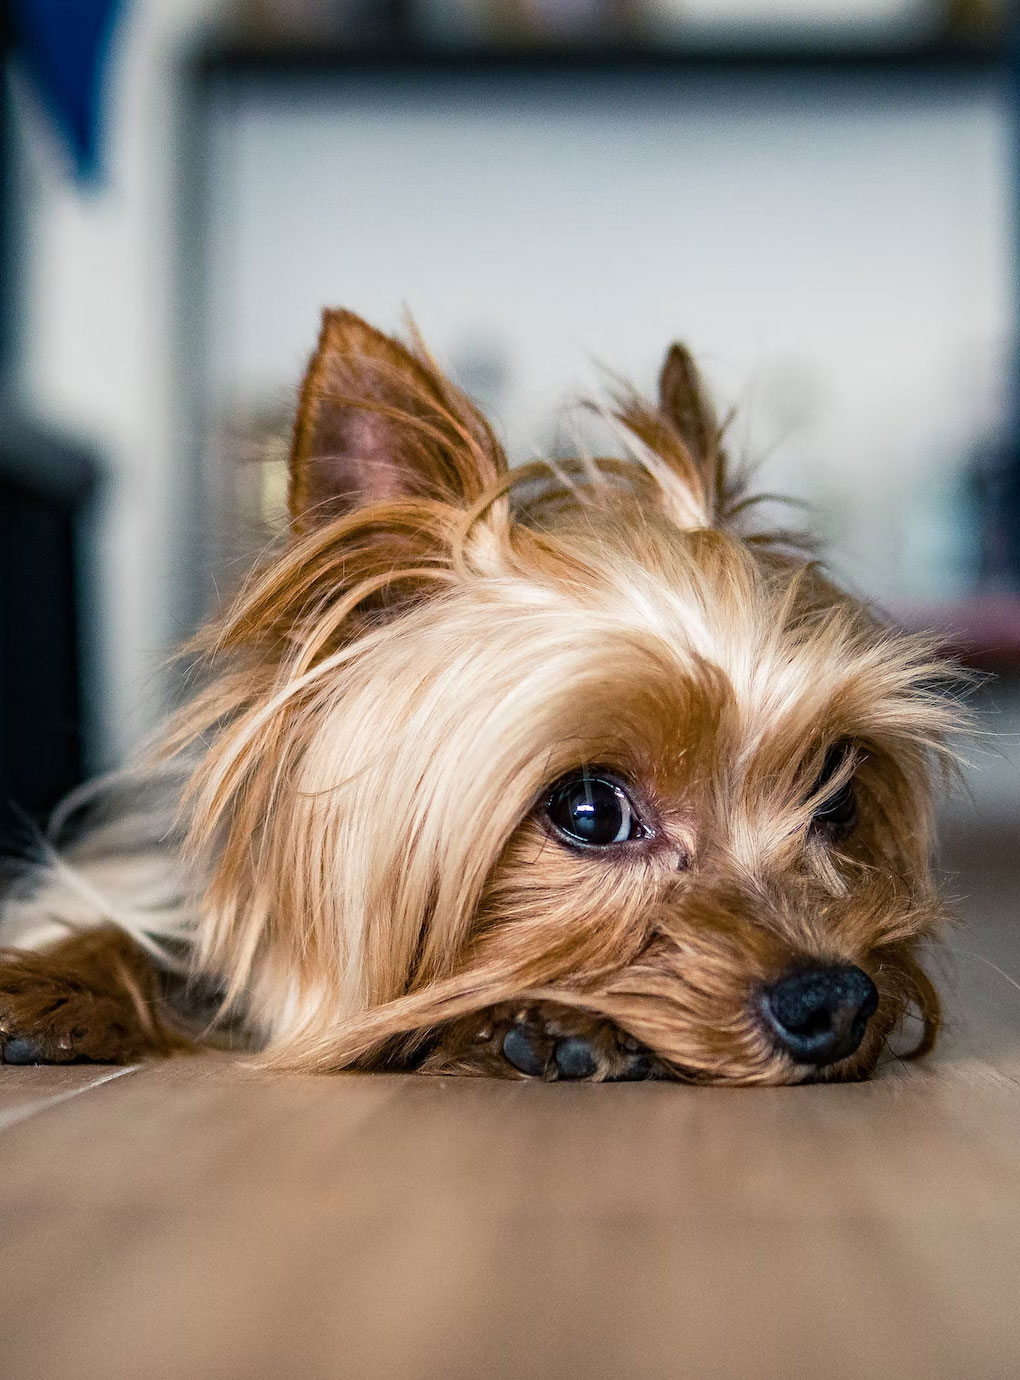 What should a Yorkie's diet consist of?